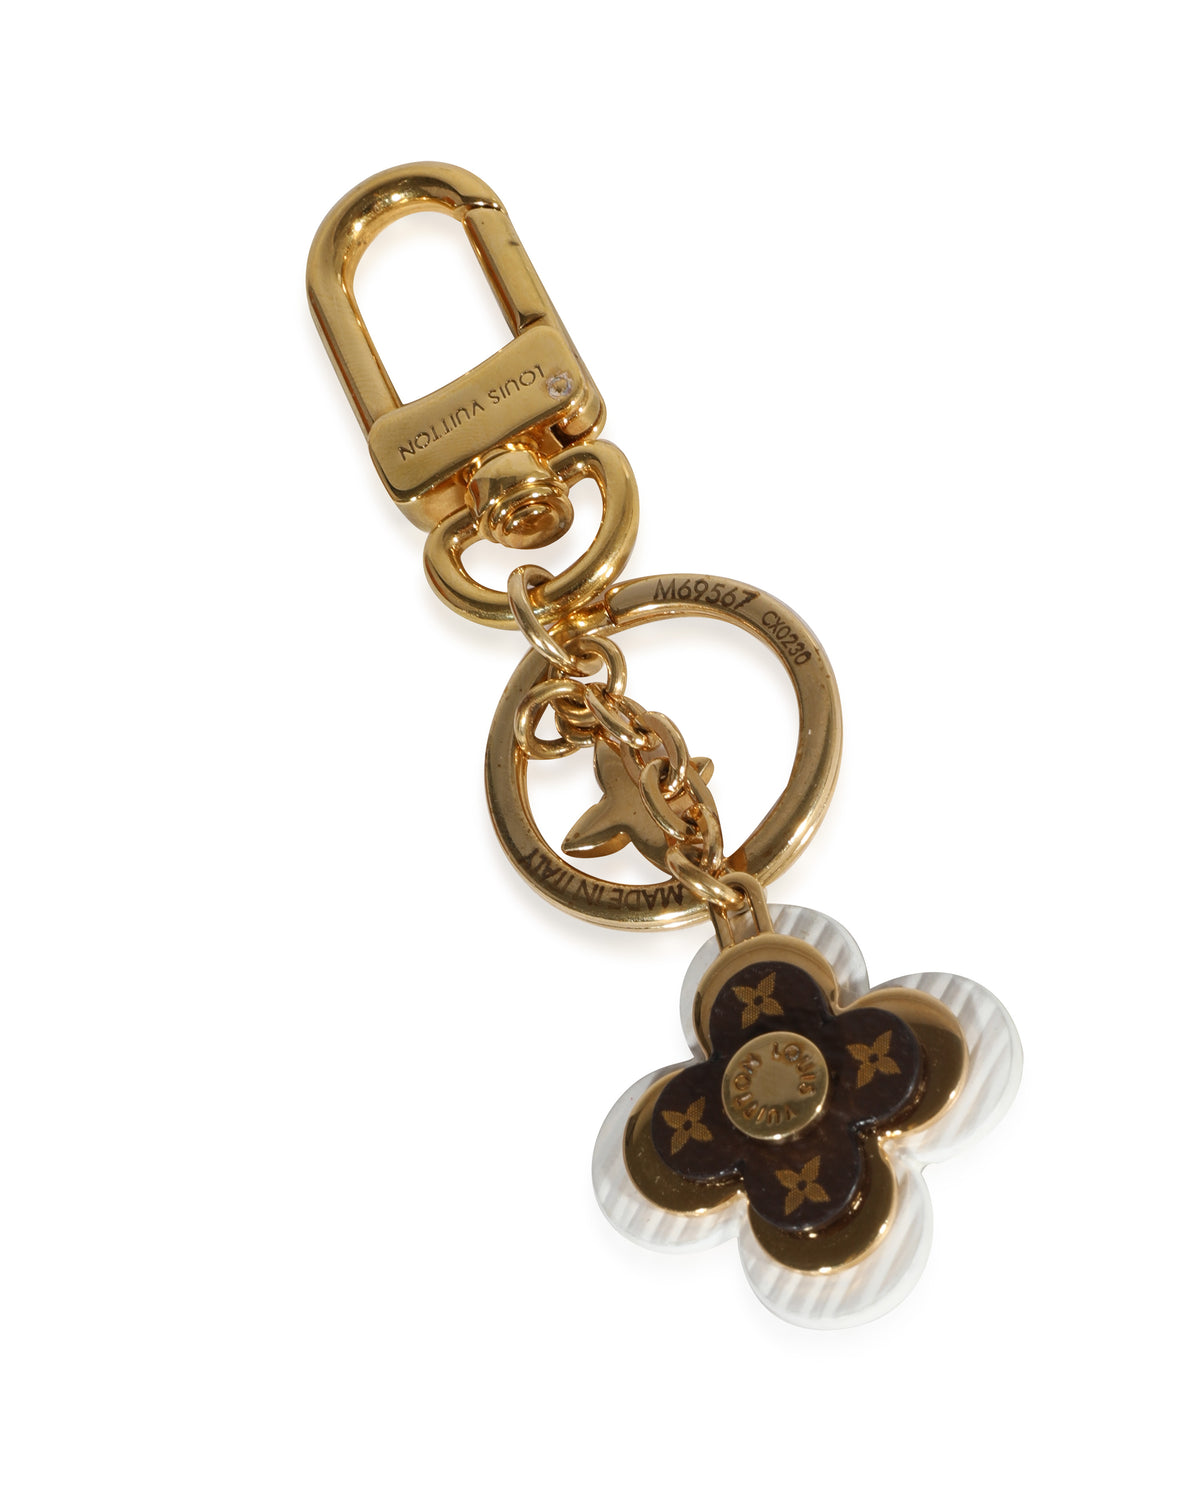 Louis Vuitton Blooming Bag Charm, Gold, One Size